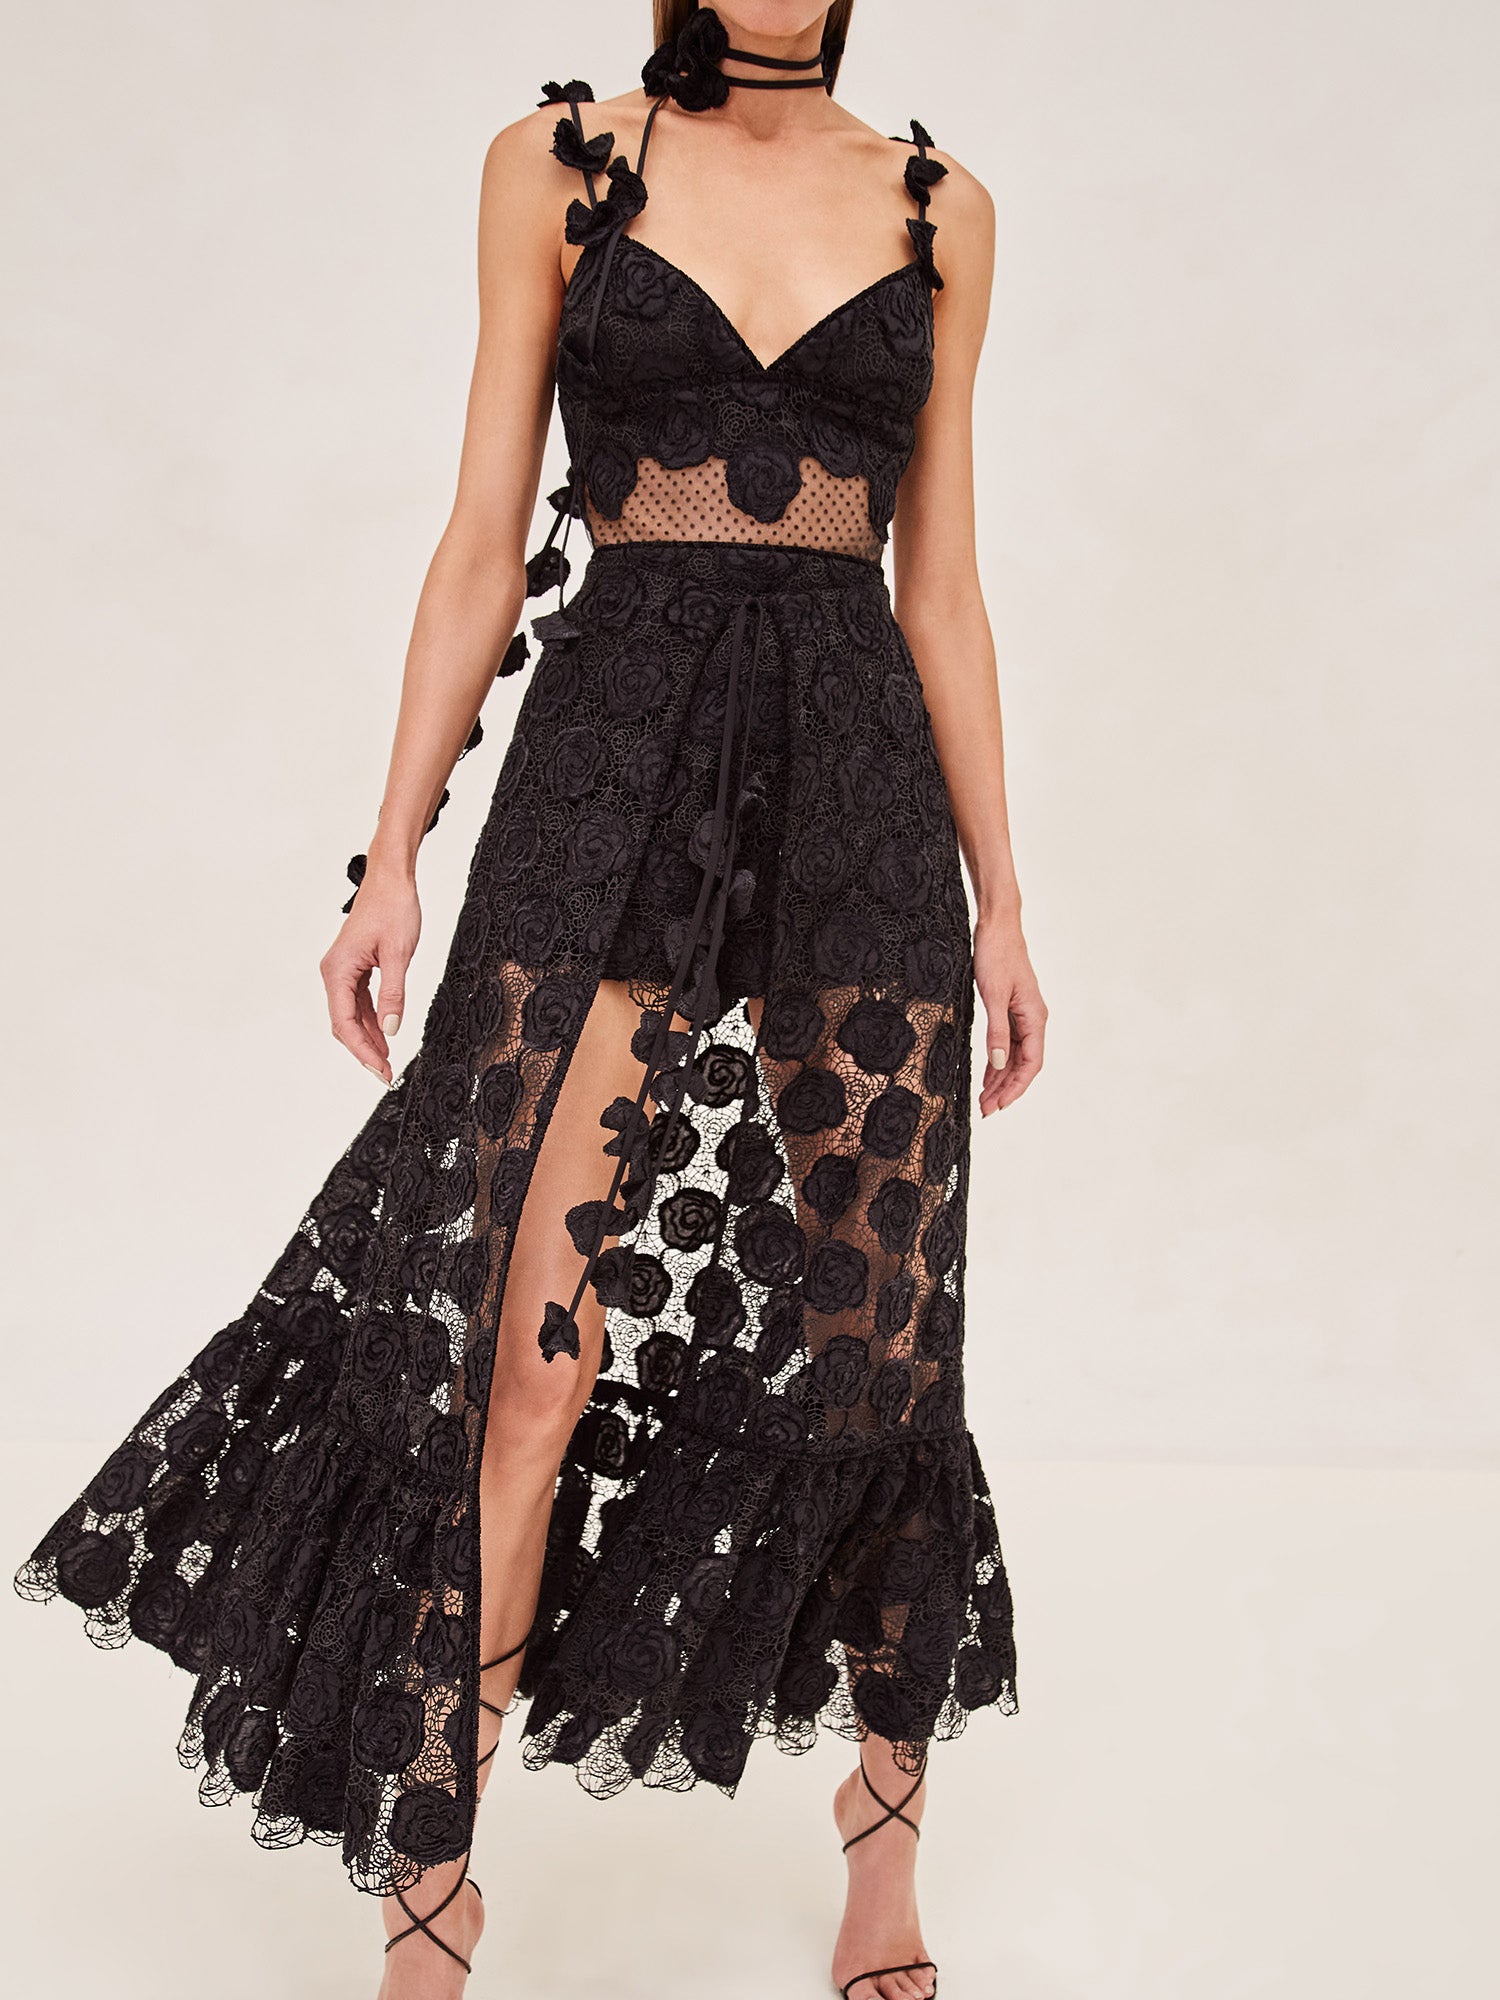 ALEXIS Armas romper in black lace with removeable skirt.hover image